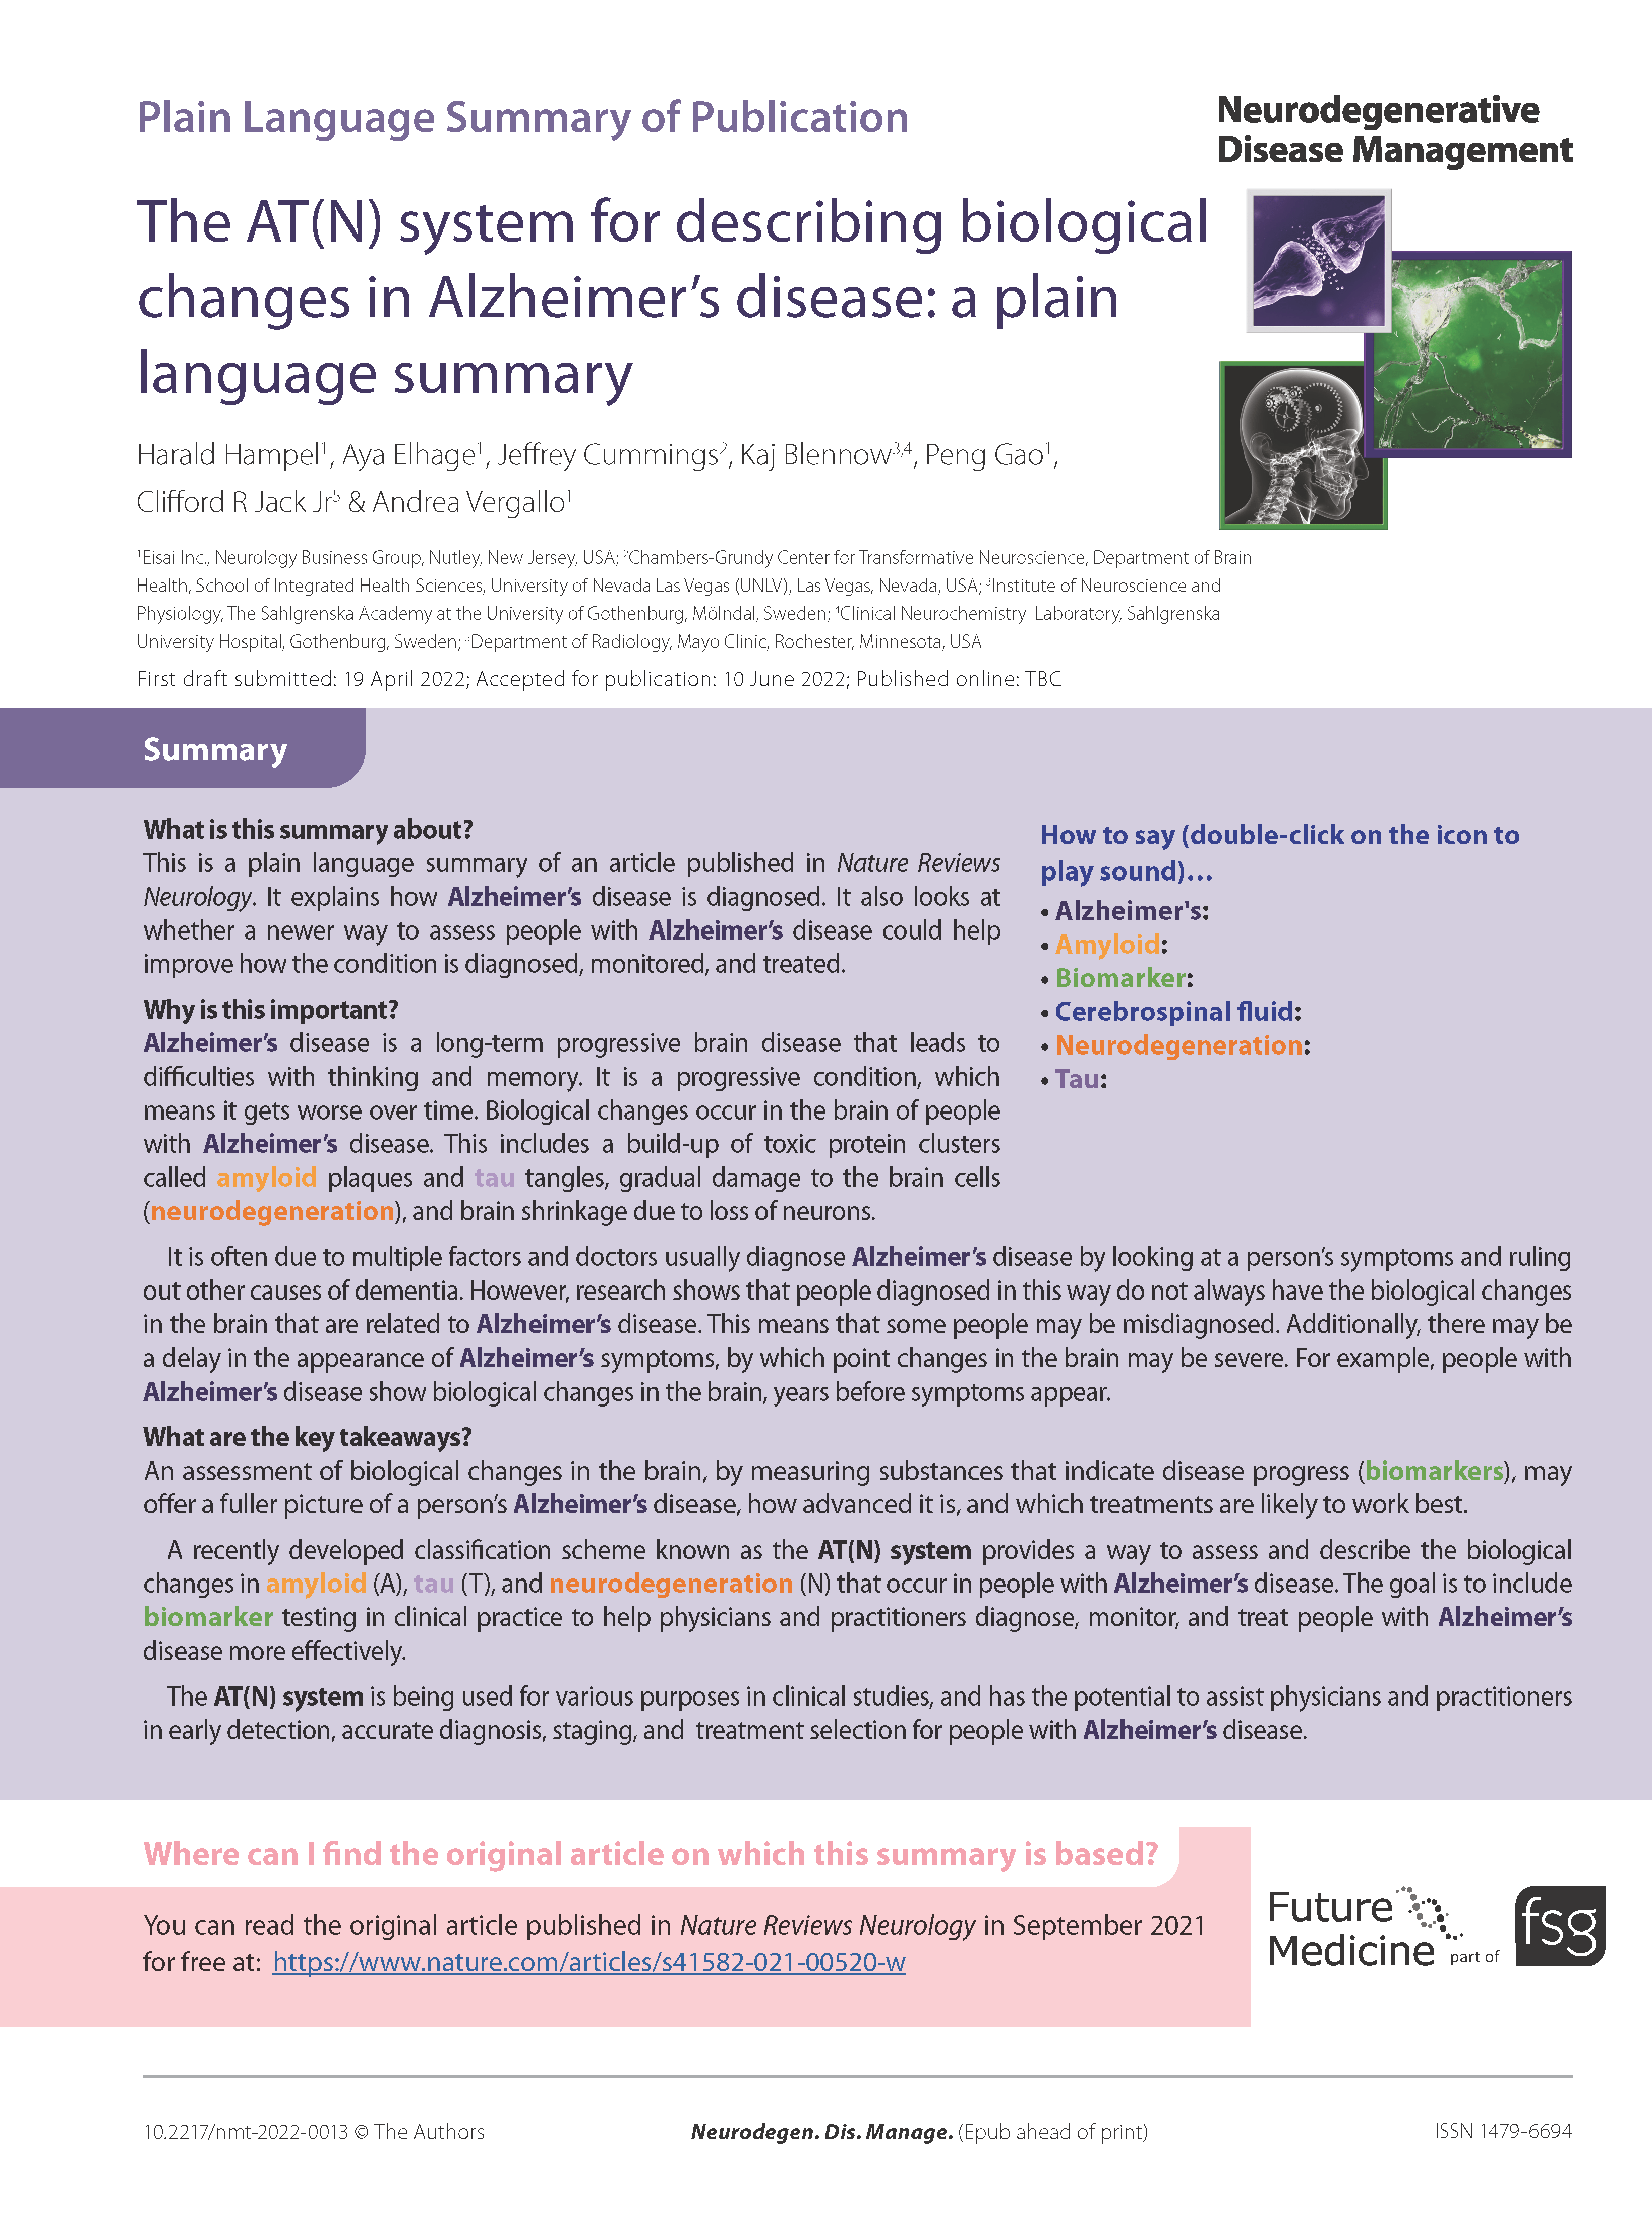 The AT(N) system for describing biological changes in Alzheimer’s disease: a plain language summary